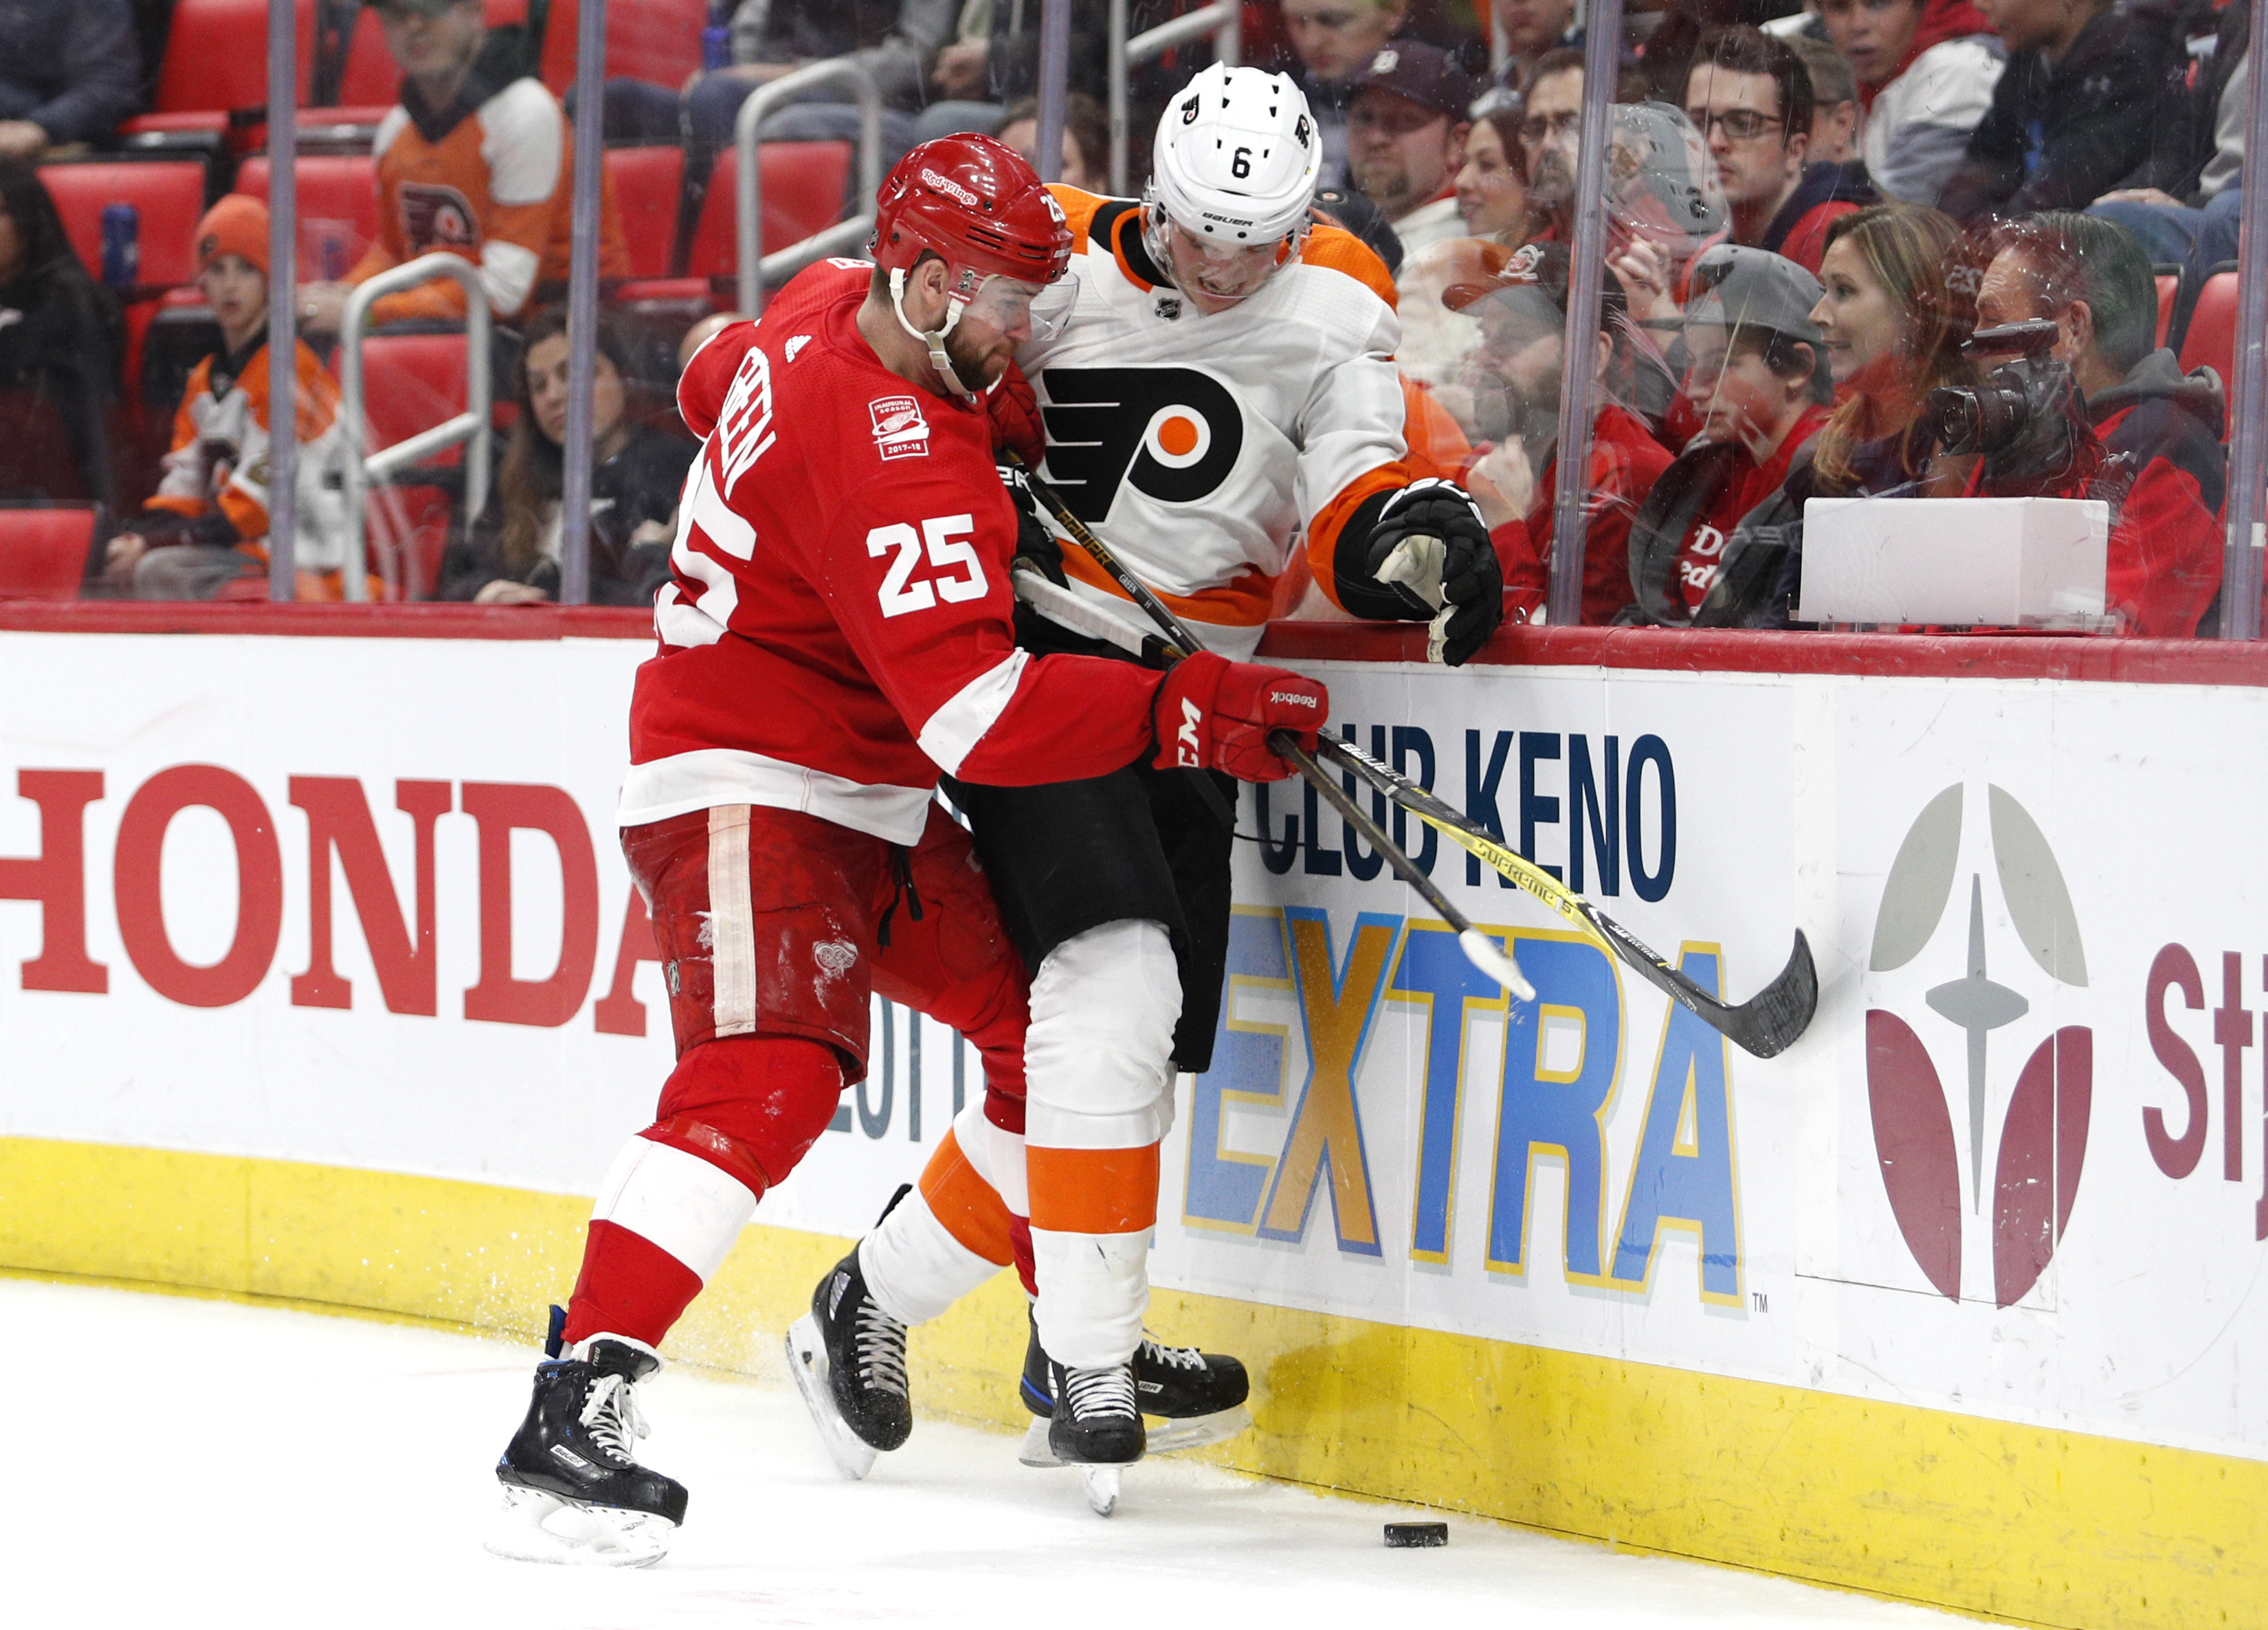 Goalie Issues Dooming the Flyers Again? What? No! Can’t Be! Thoughts After Red Wings 5, Flyers 4